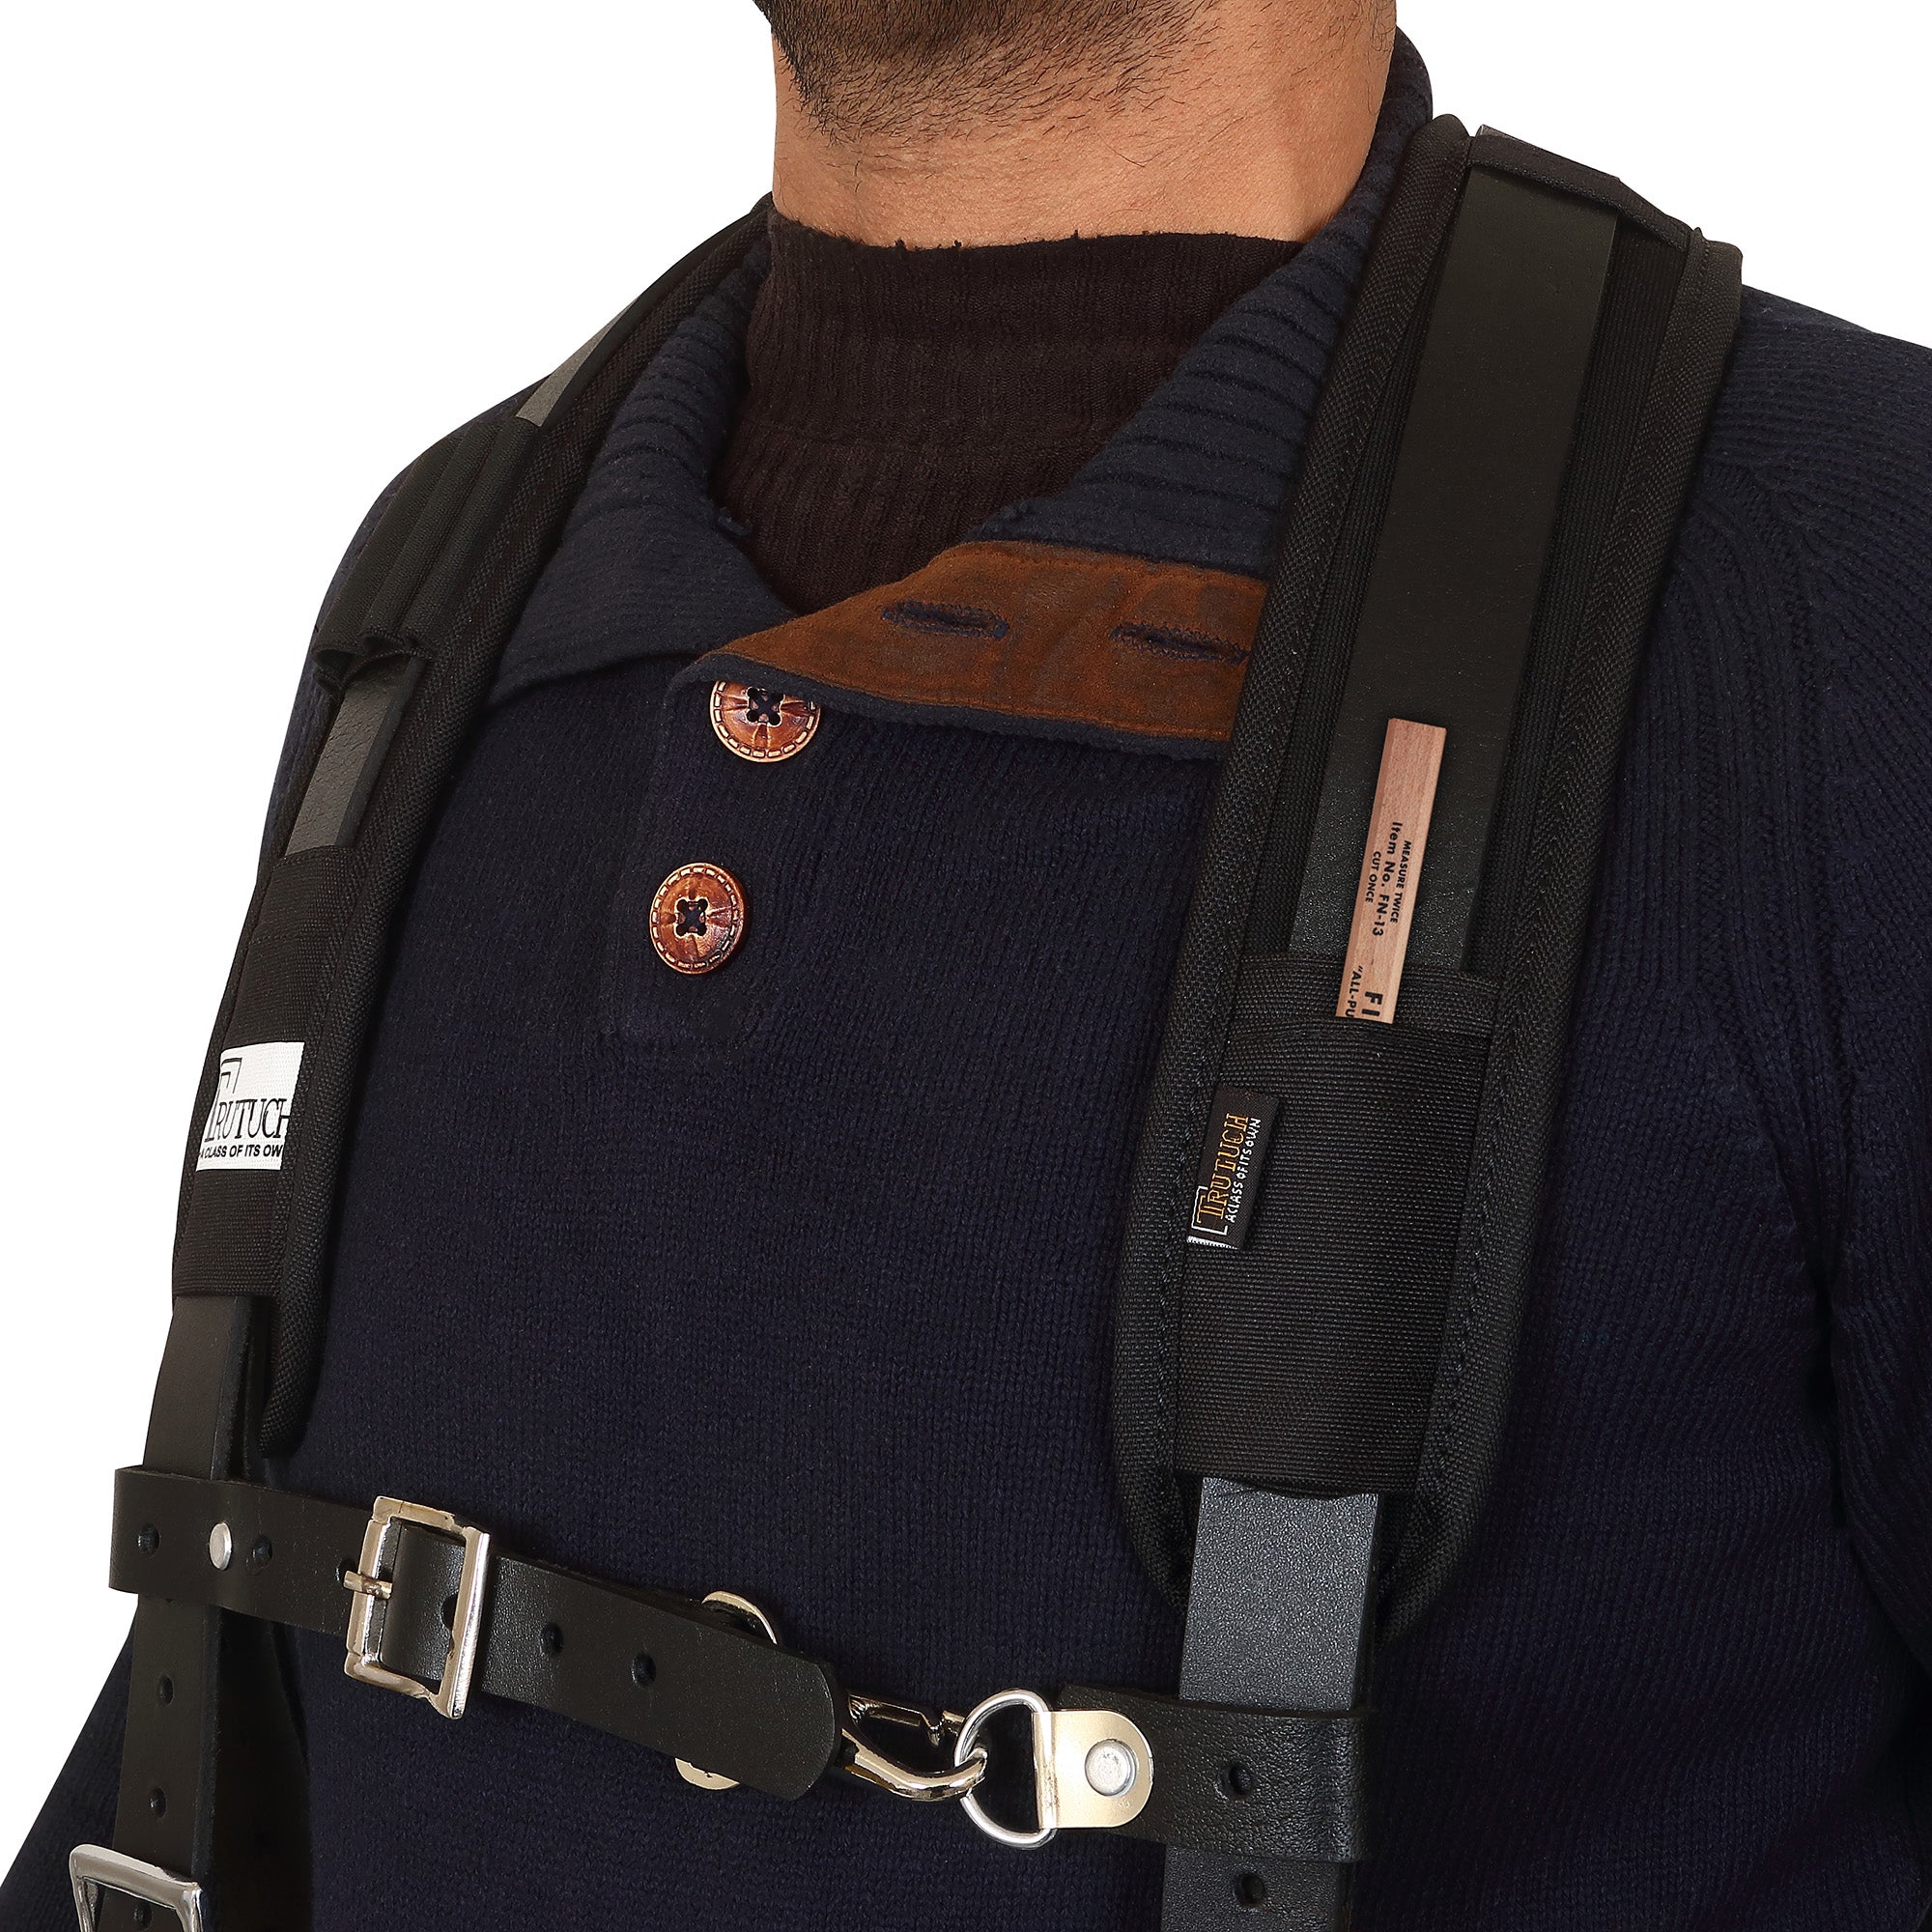 Trutuch Black Leather Work Suspenders With Pockets, Comfortable Padded Yoke Leather Tool Belt Suspenders, Stronghold Suspension System, TT-7030-S